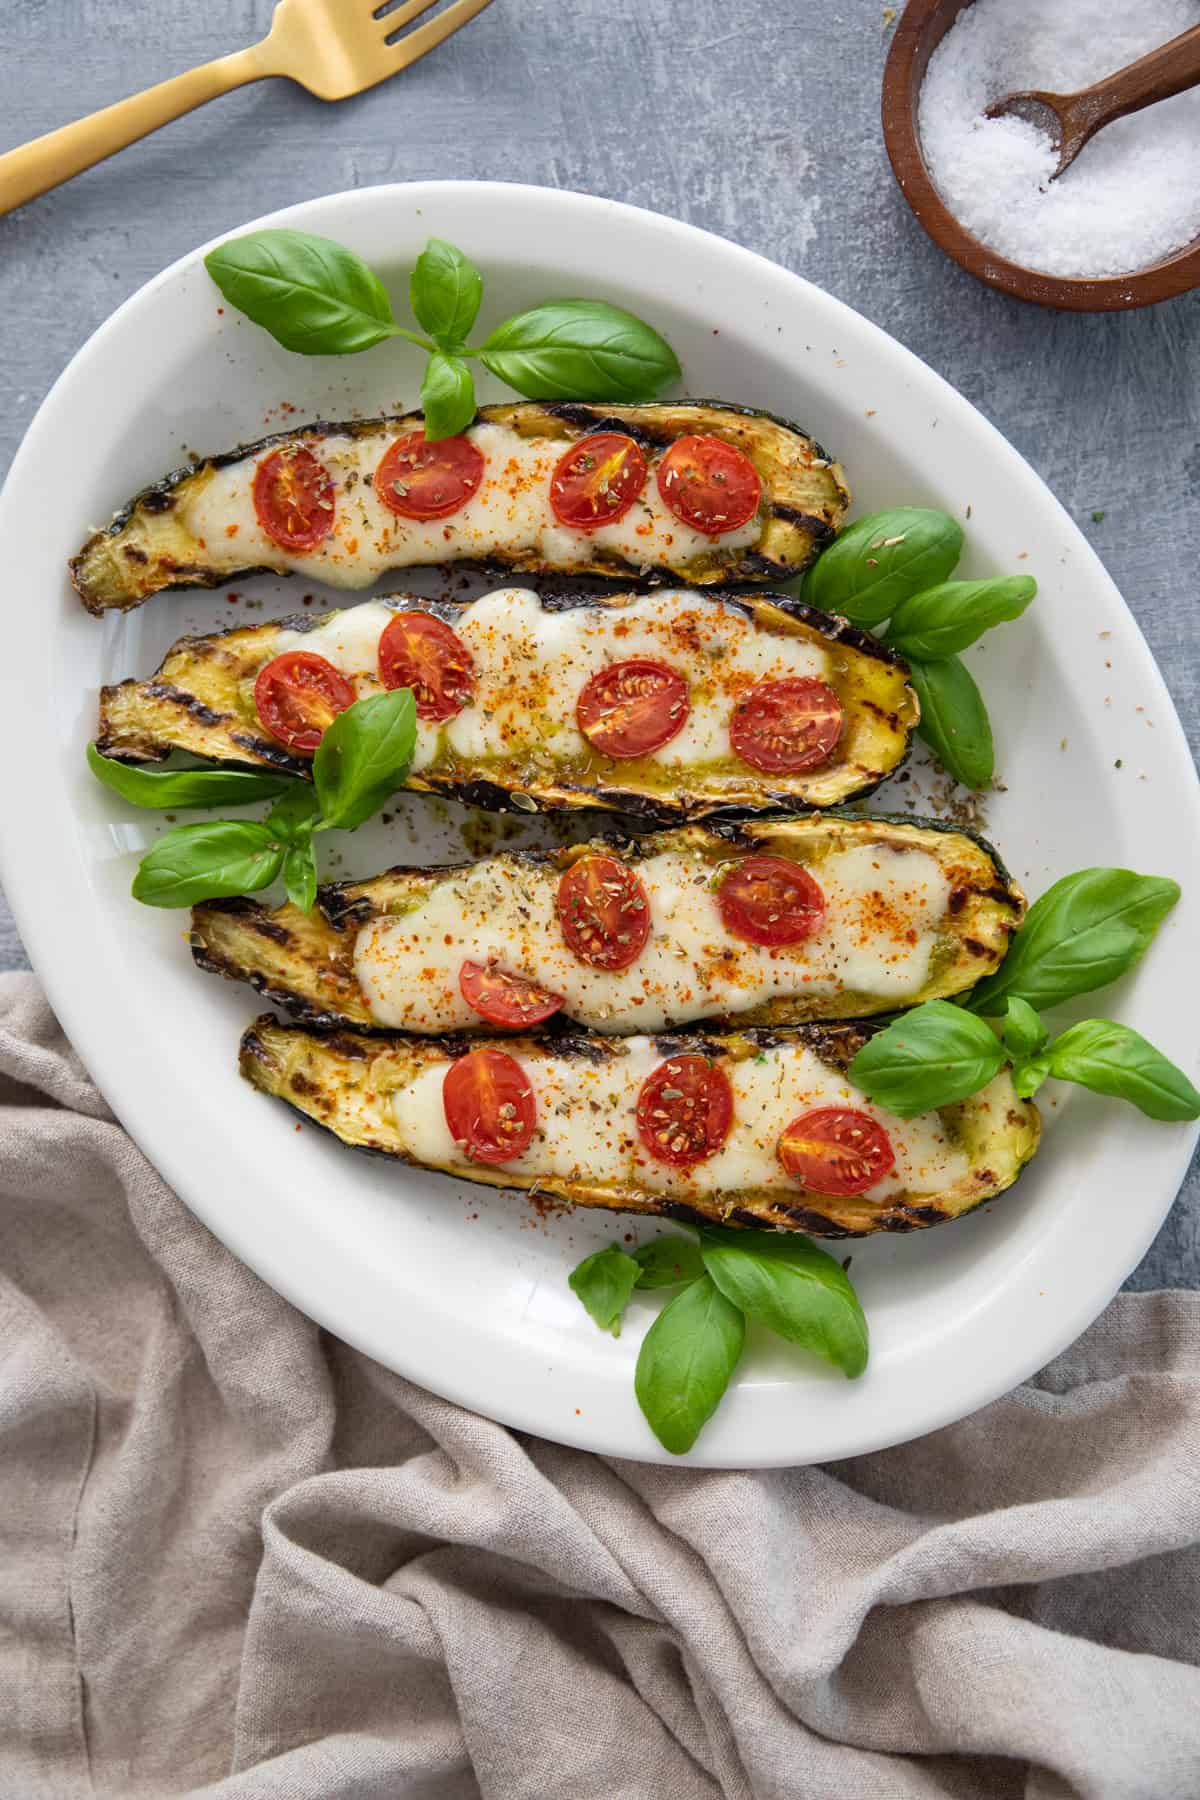 Grilled caprese stuffed zucchini boats are easy and delicious. Learn to fill zucchinis with pesto, cheese and tomatoes to make the perfect dish.
